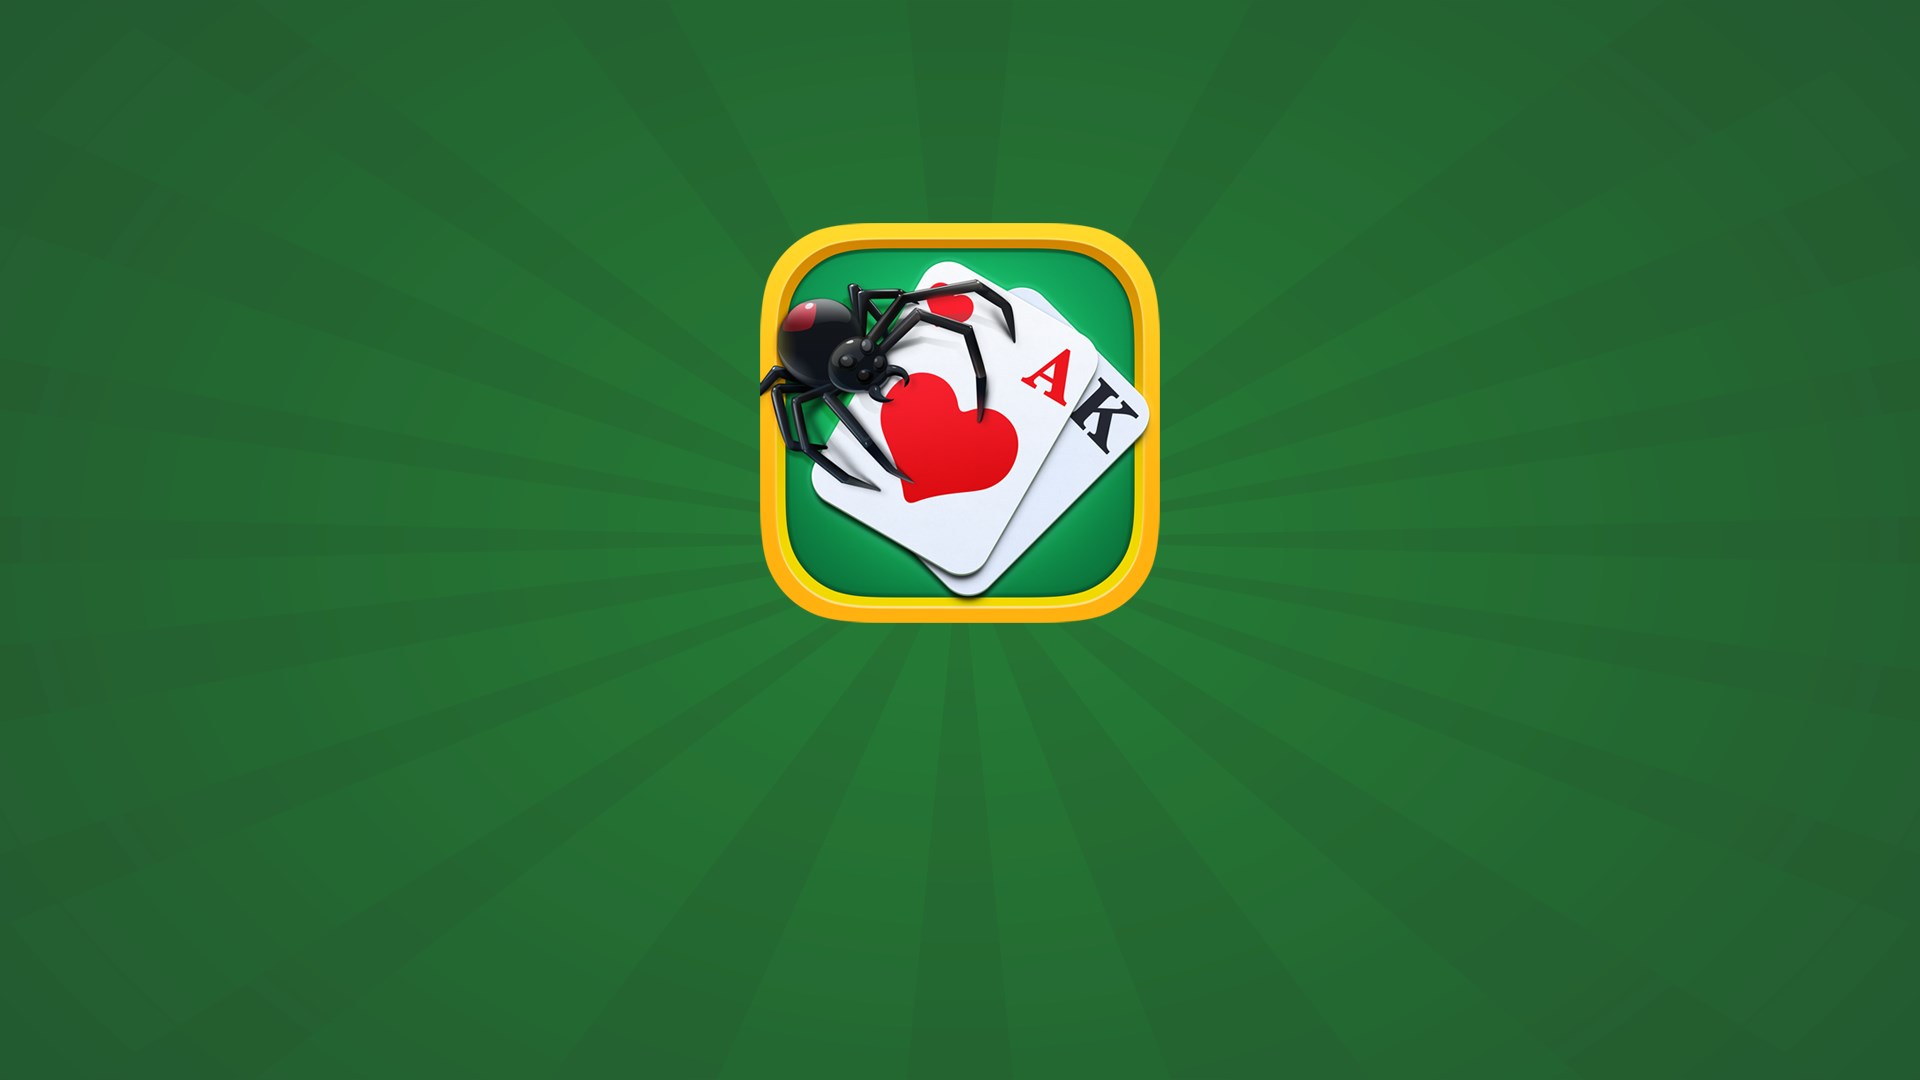 spider solitaire collection free for windows 10